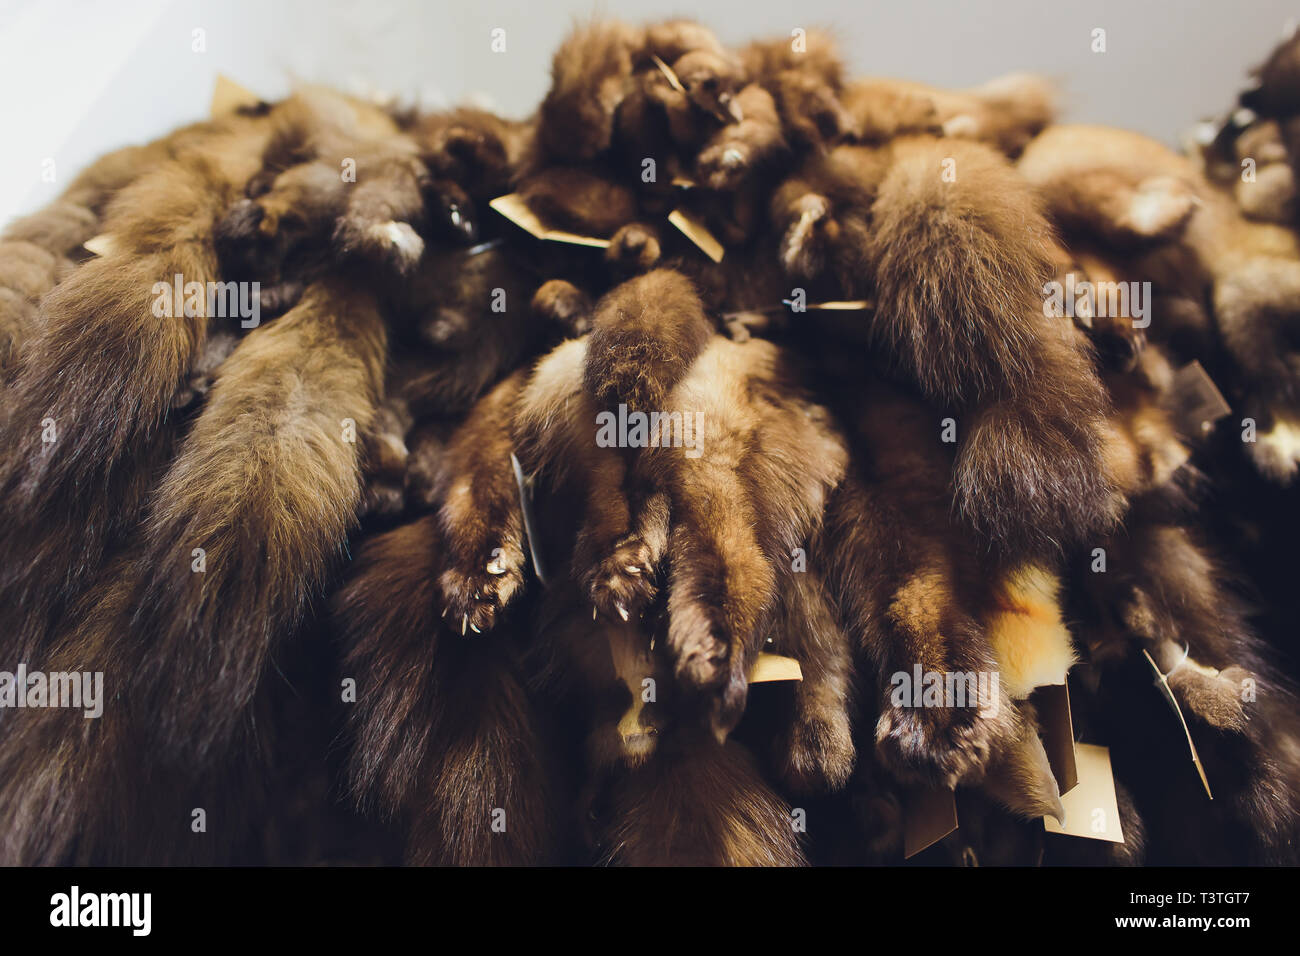 Animal fur. foxes, raccoon, wolf, beaver, mink, nutria hanging after processing. Stock Photo